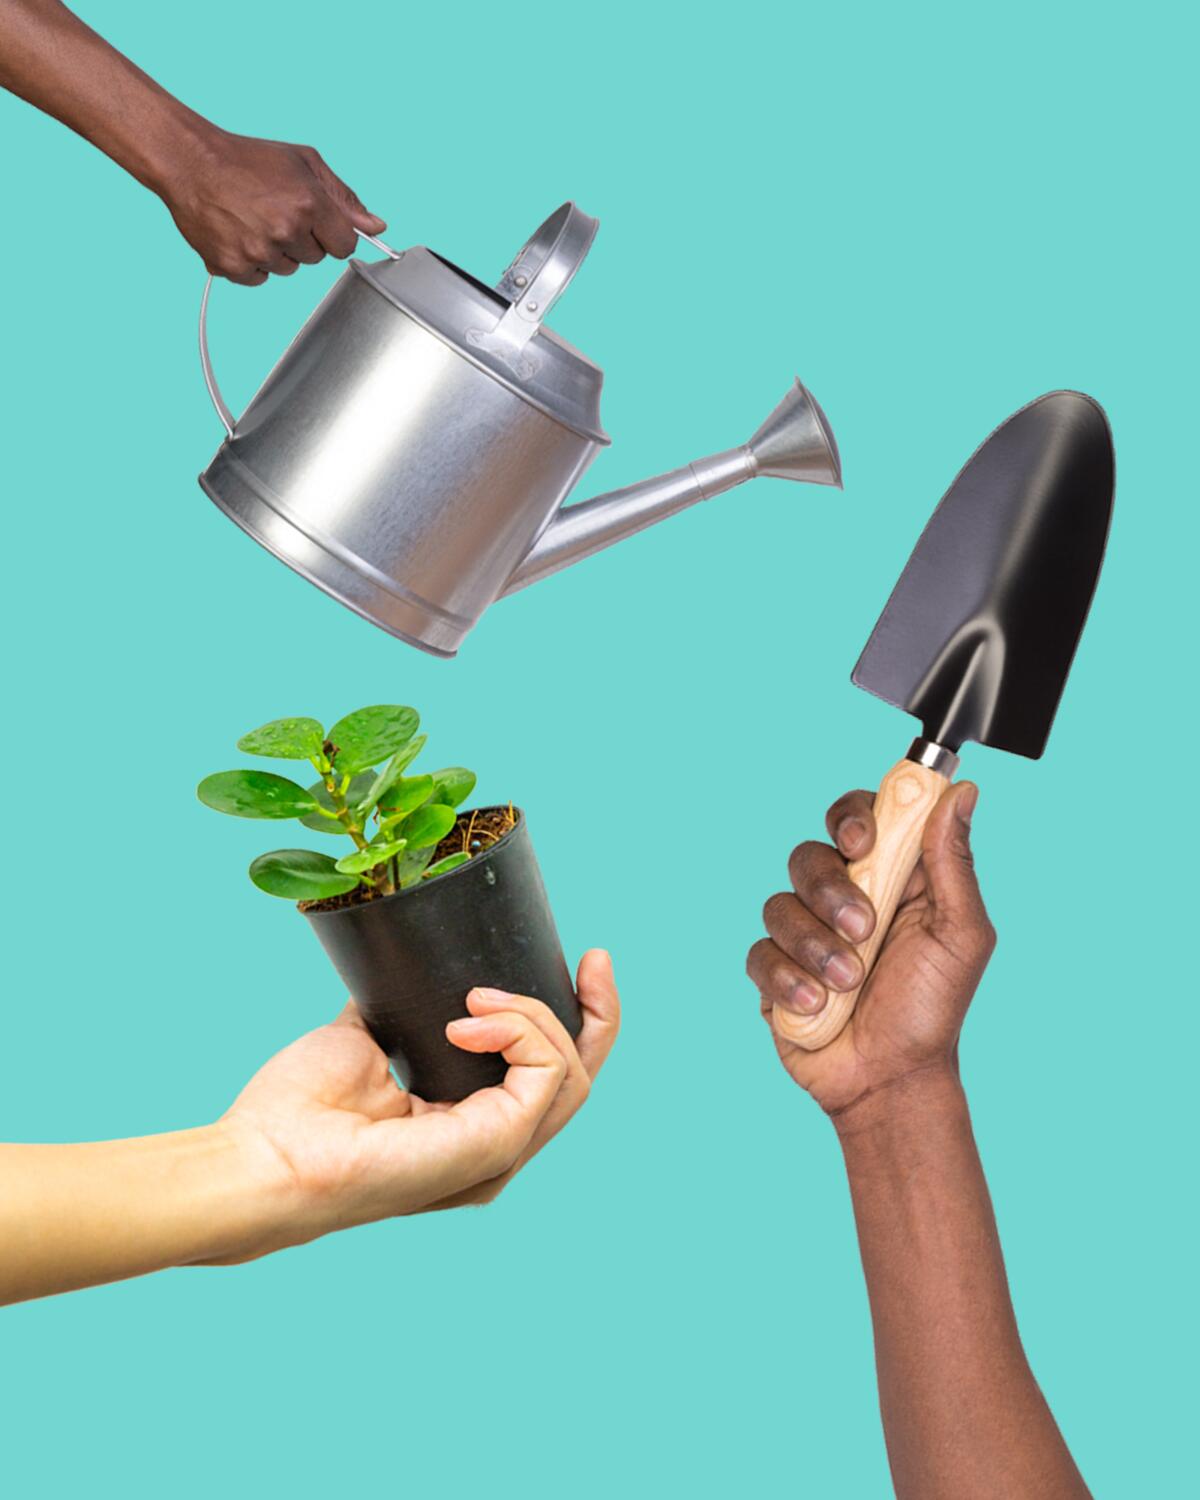 Hands holding a watering can, a trowel and a plant in a plastic pot.